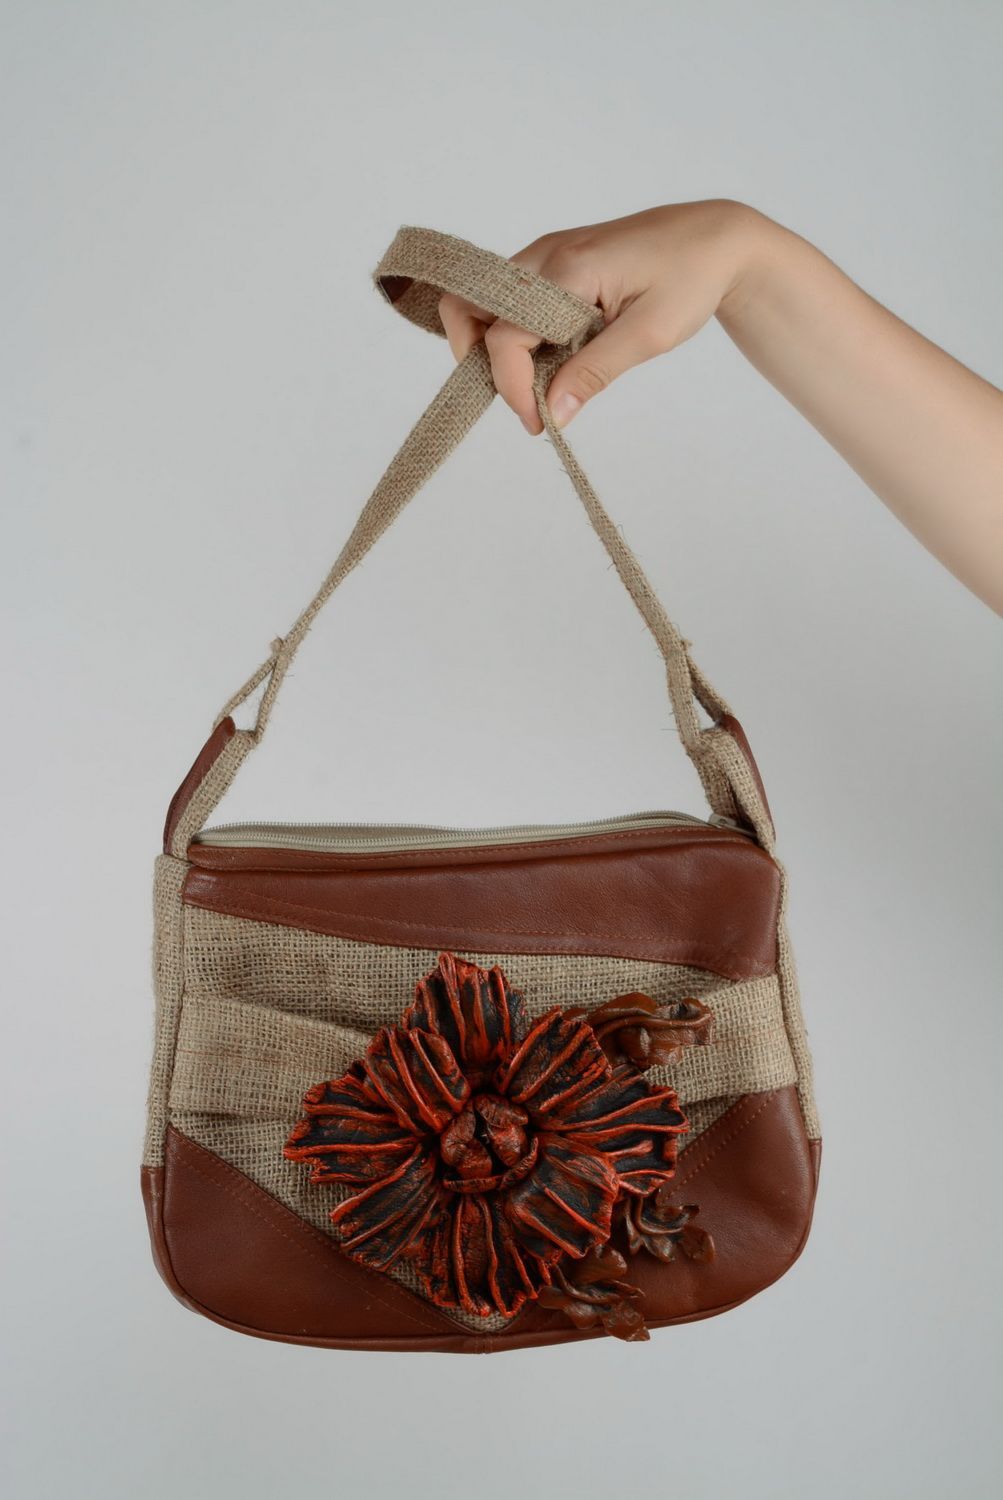 Purse made of leather and fabric photo 2